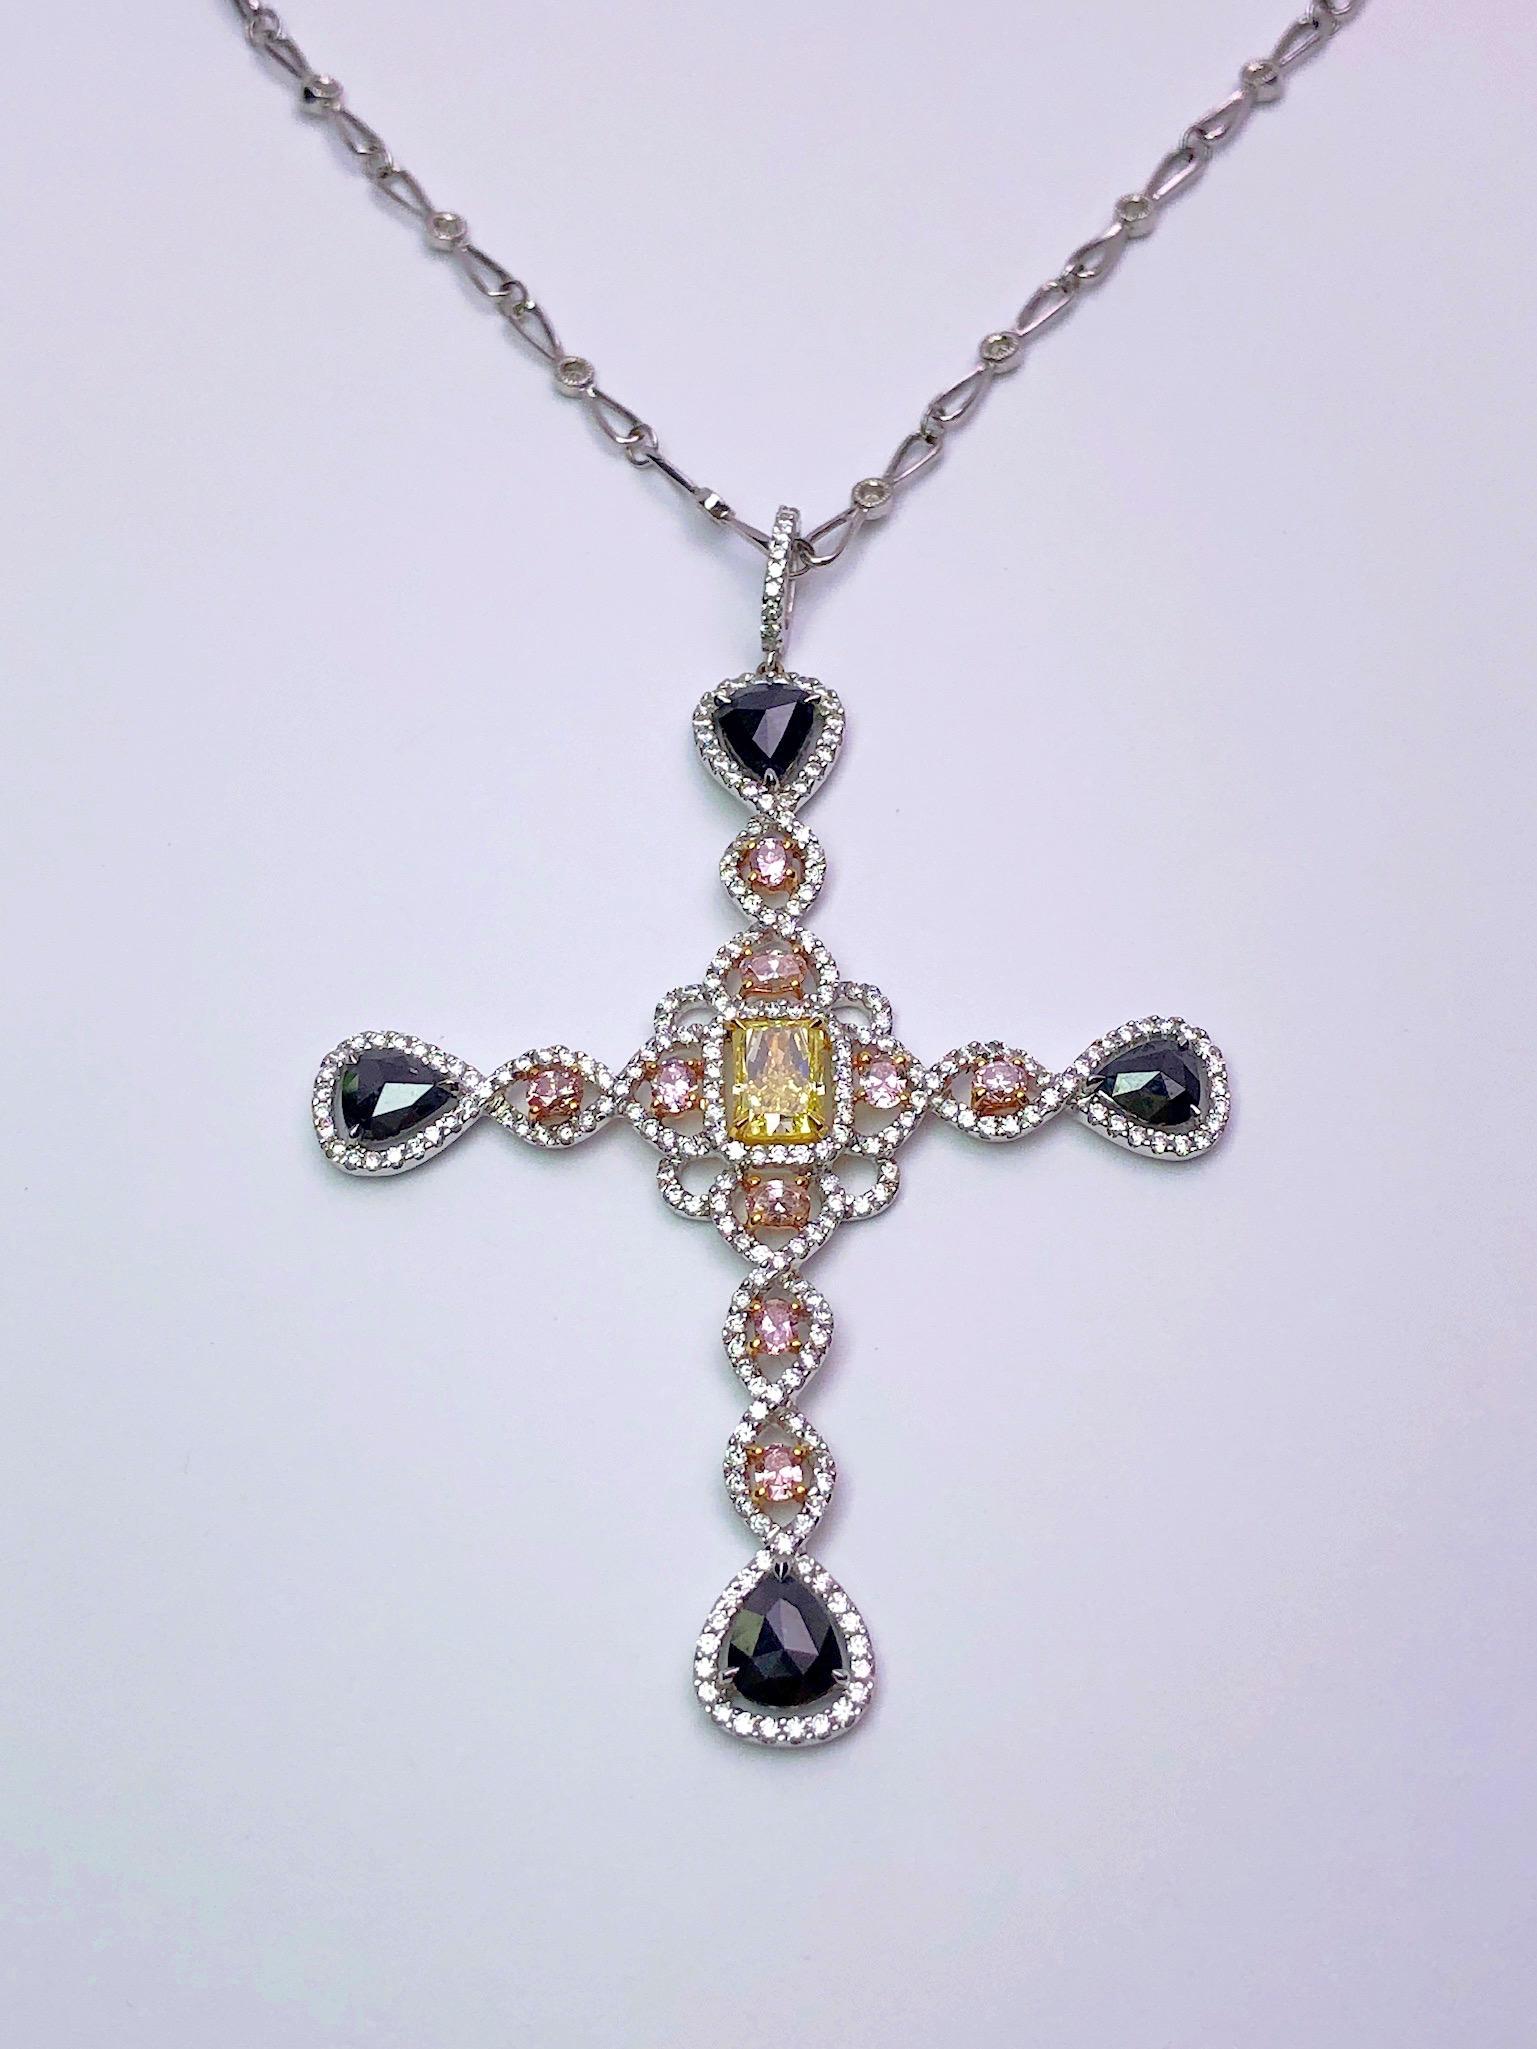 Radiant Cut 18KT WG Fancy Yellow, Pink & White Diamond Cross Pendant with Diamond Chain For Sale